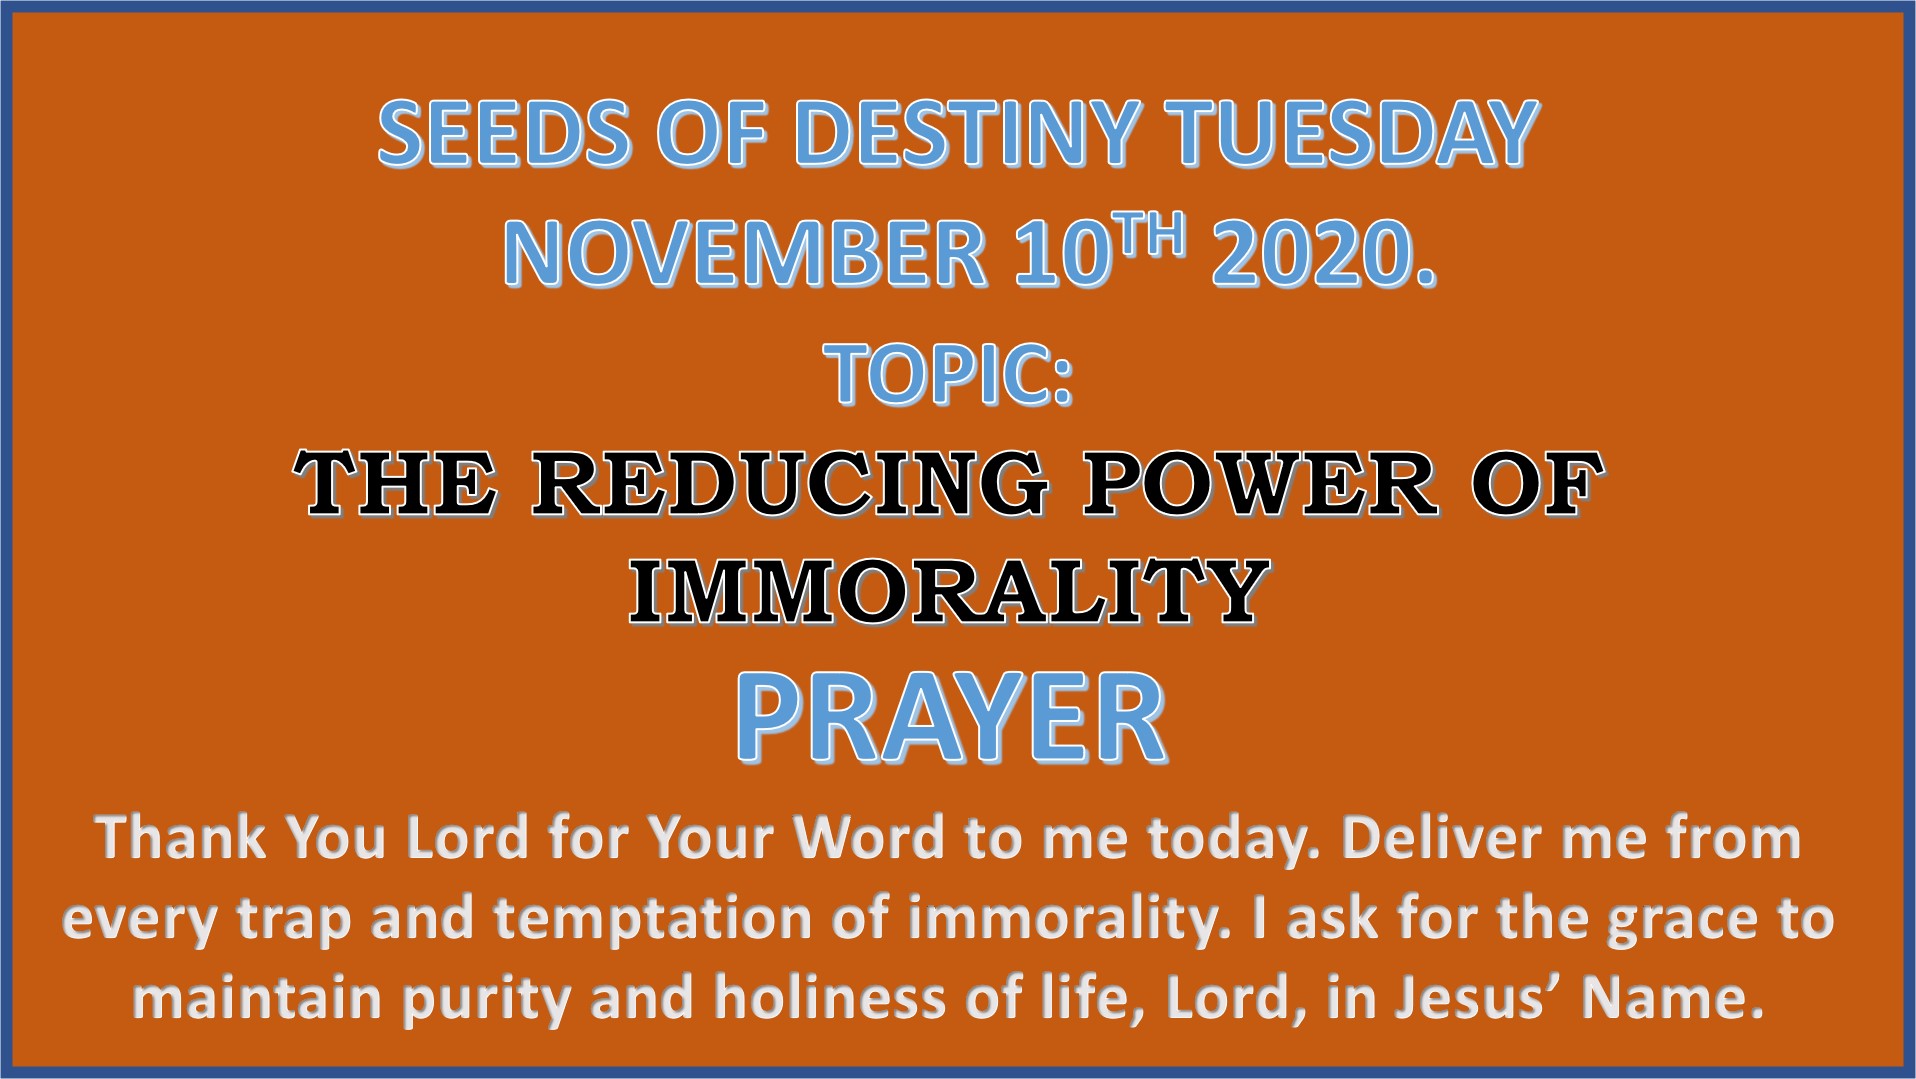 Seeds of Destiny Tuesday 10th November 2020 by Dr Paul Enenche